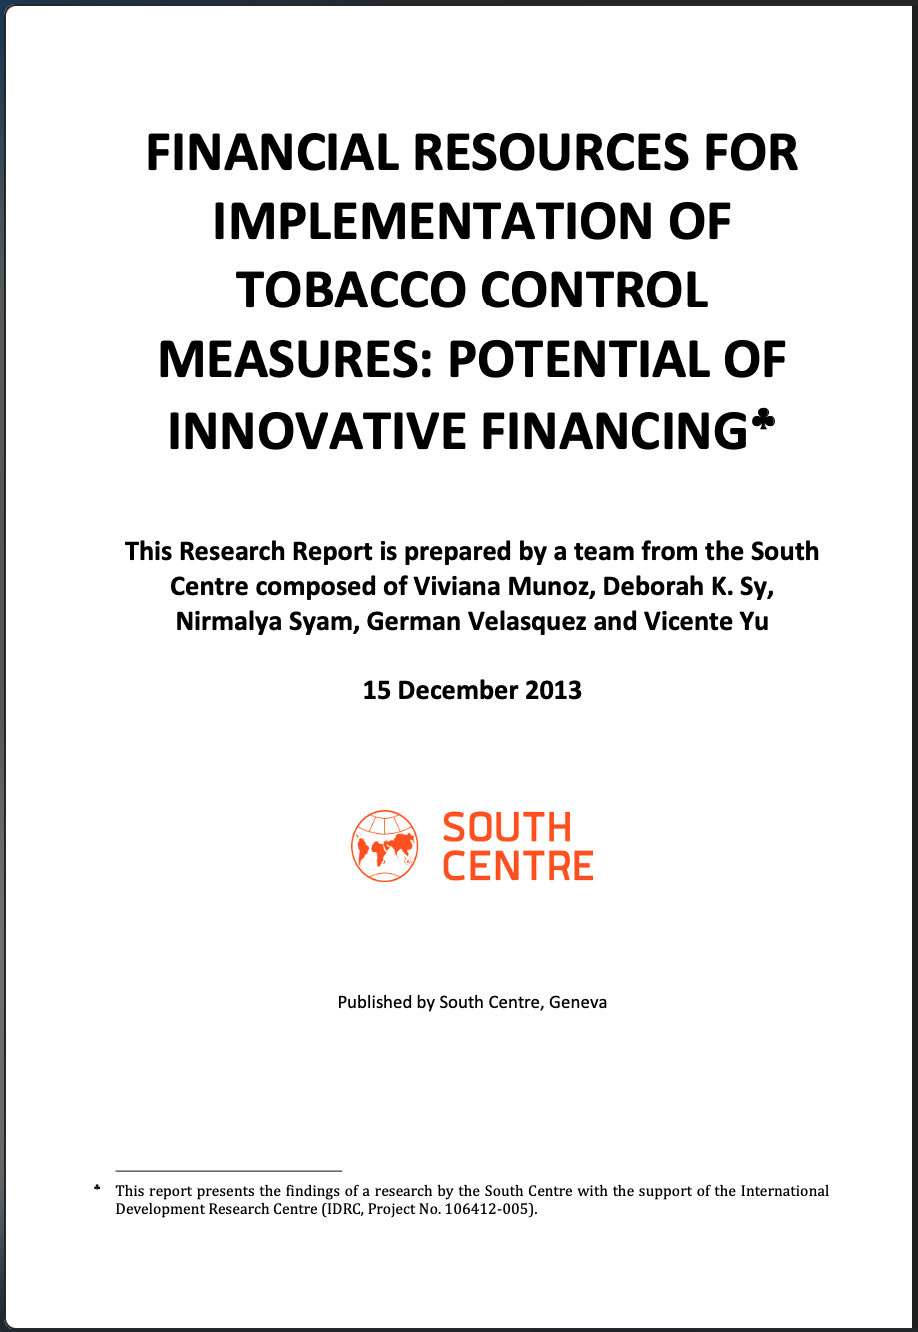 Financial Resources for Implementation of Tobacco Control Measures: Potential of Innovative Financing (South Centre 2013)